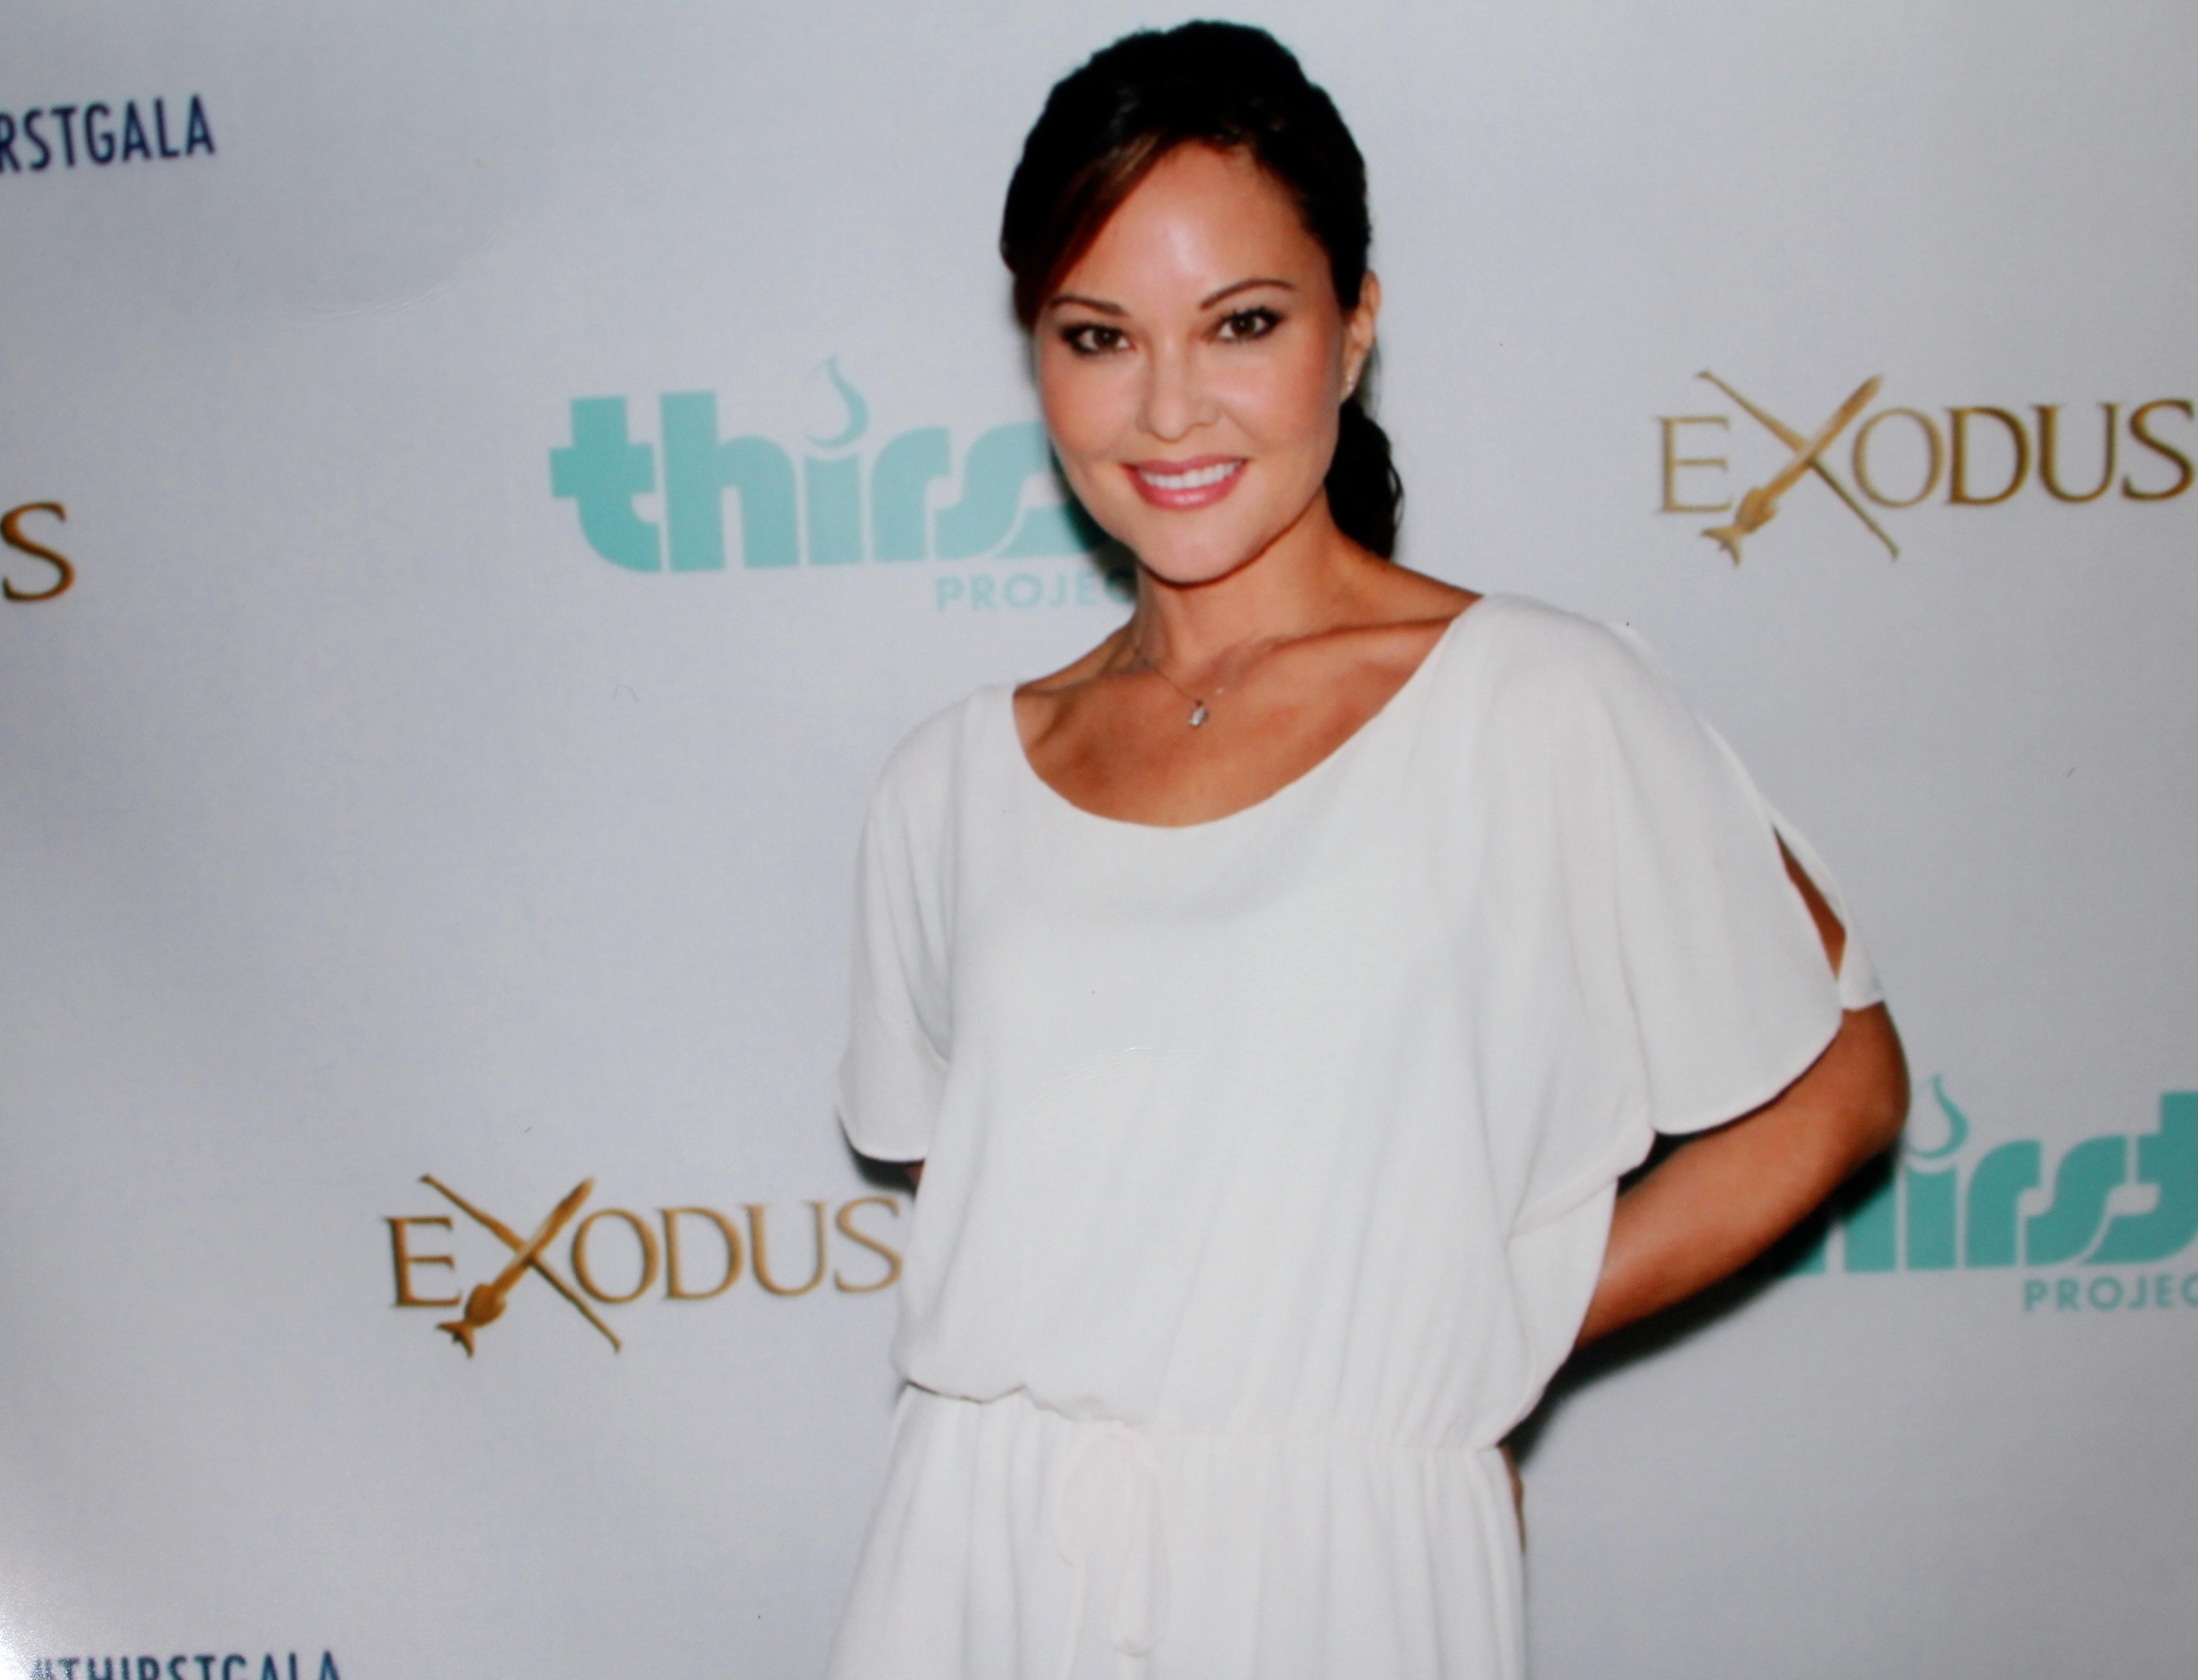 6th Annual Thirst Gala at the Beverly Hilton Hotel, Beverly Hills, Ca to benefit the Thirst Project.